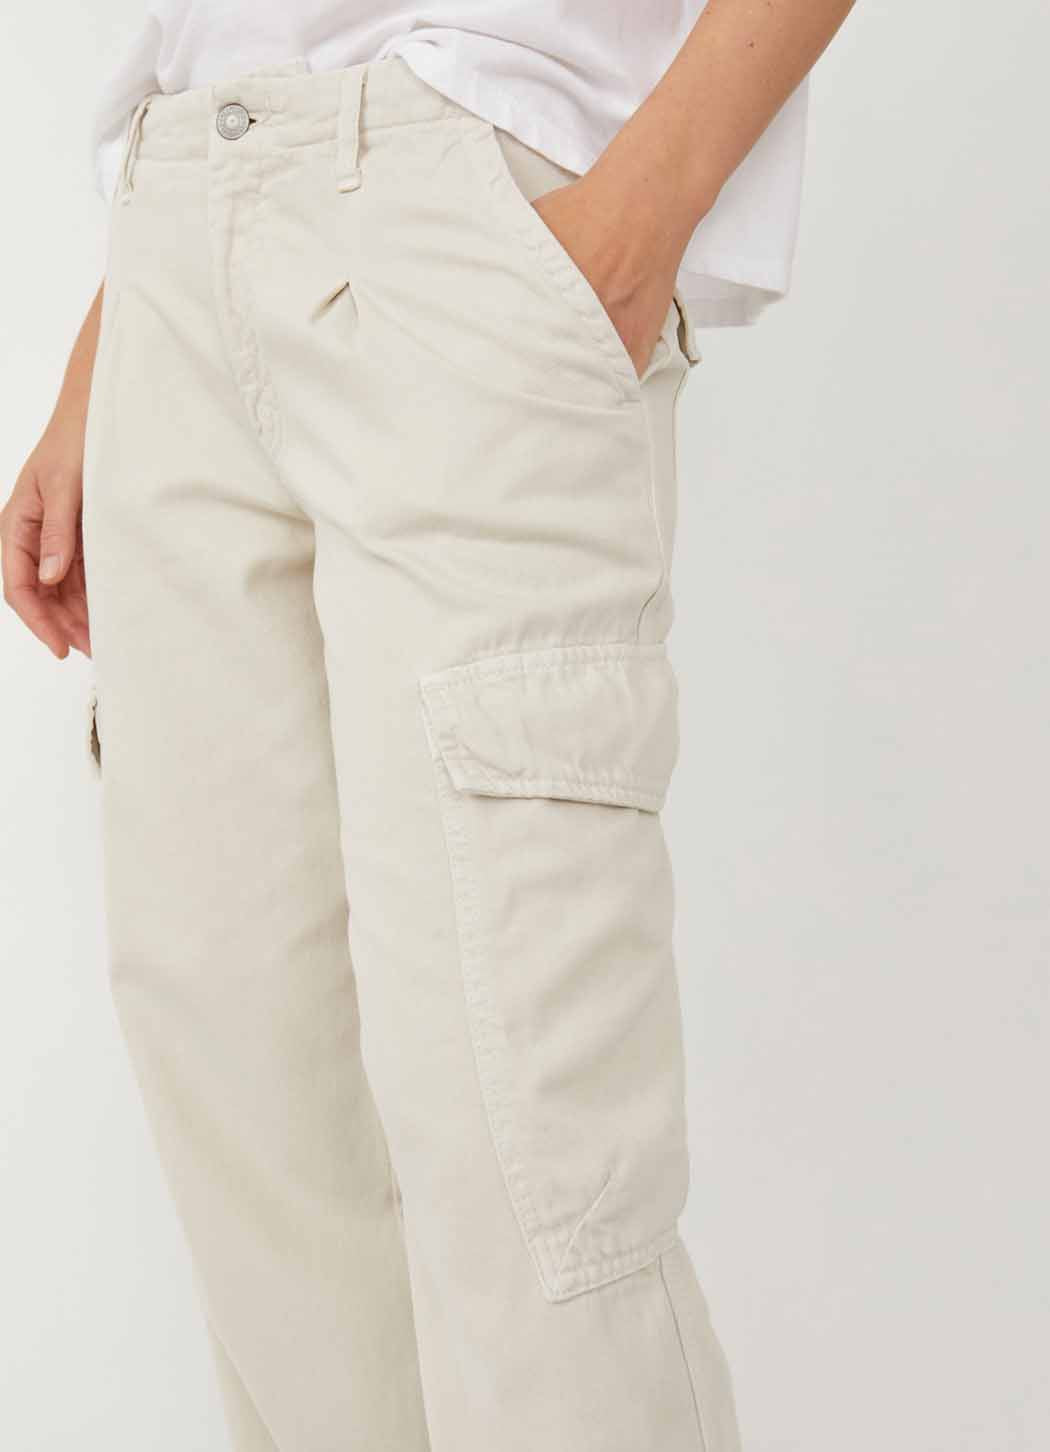 Free People First Light Utility Pant